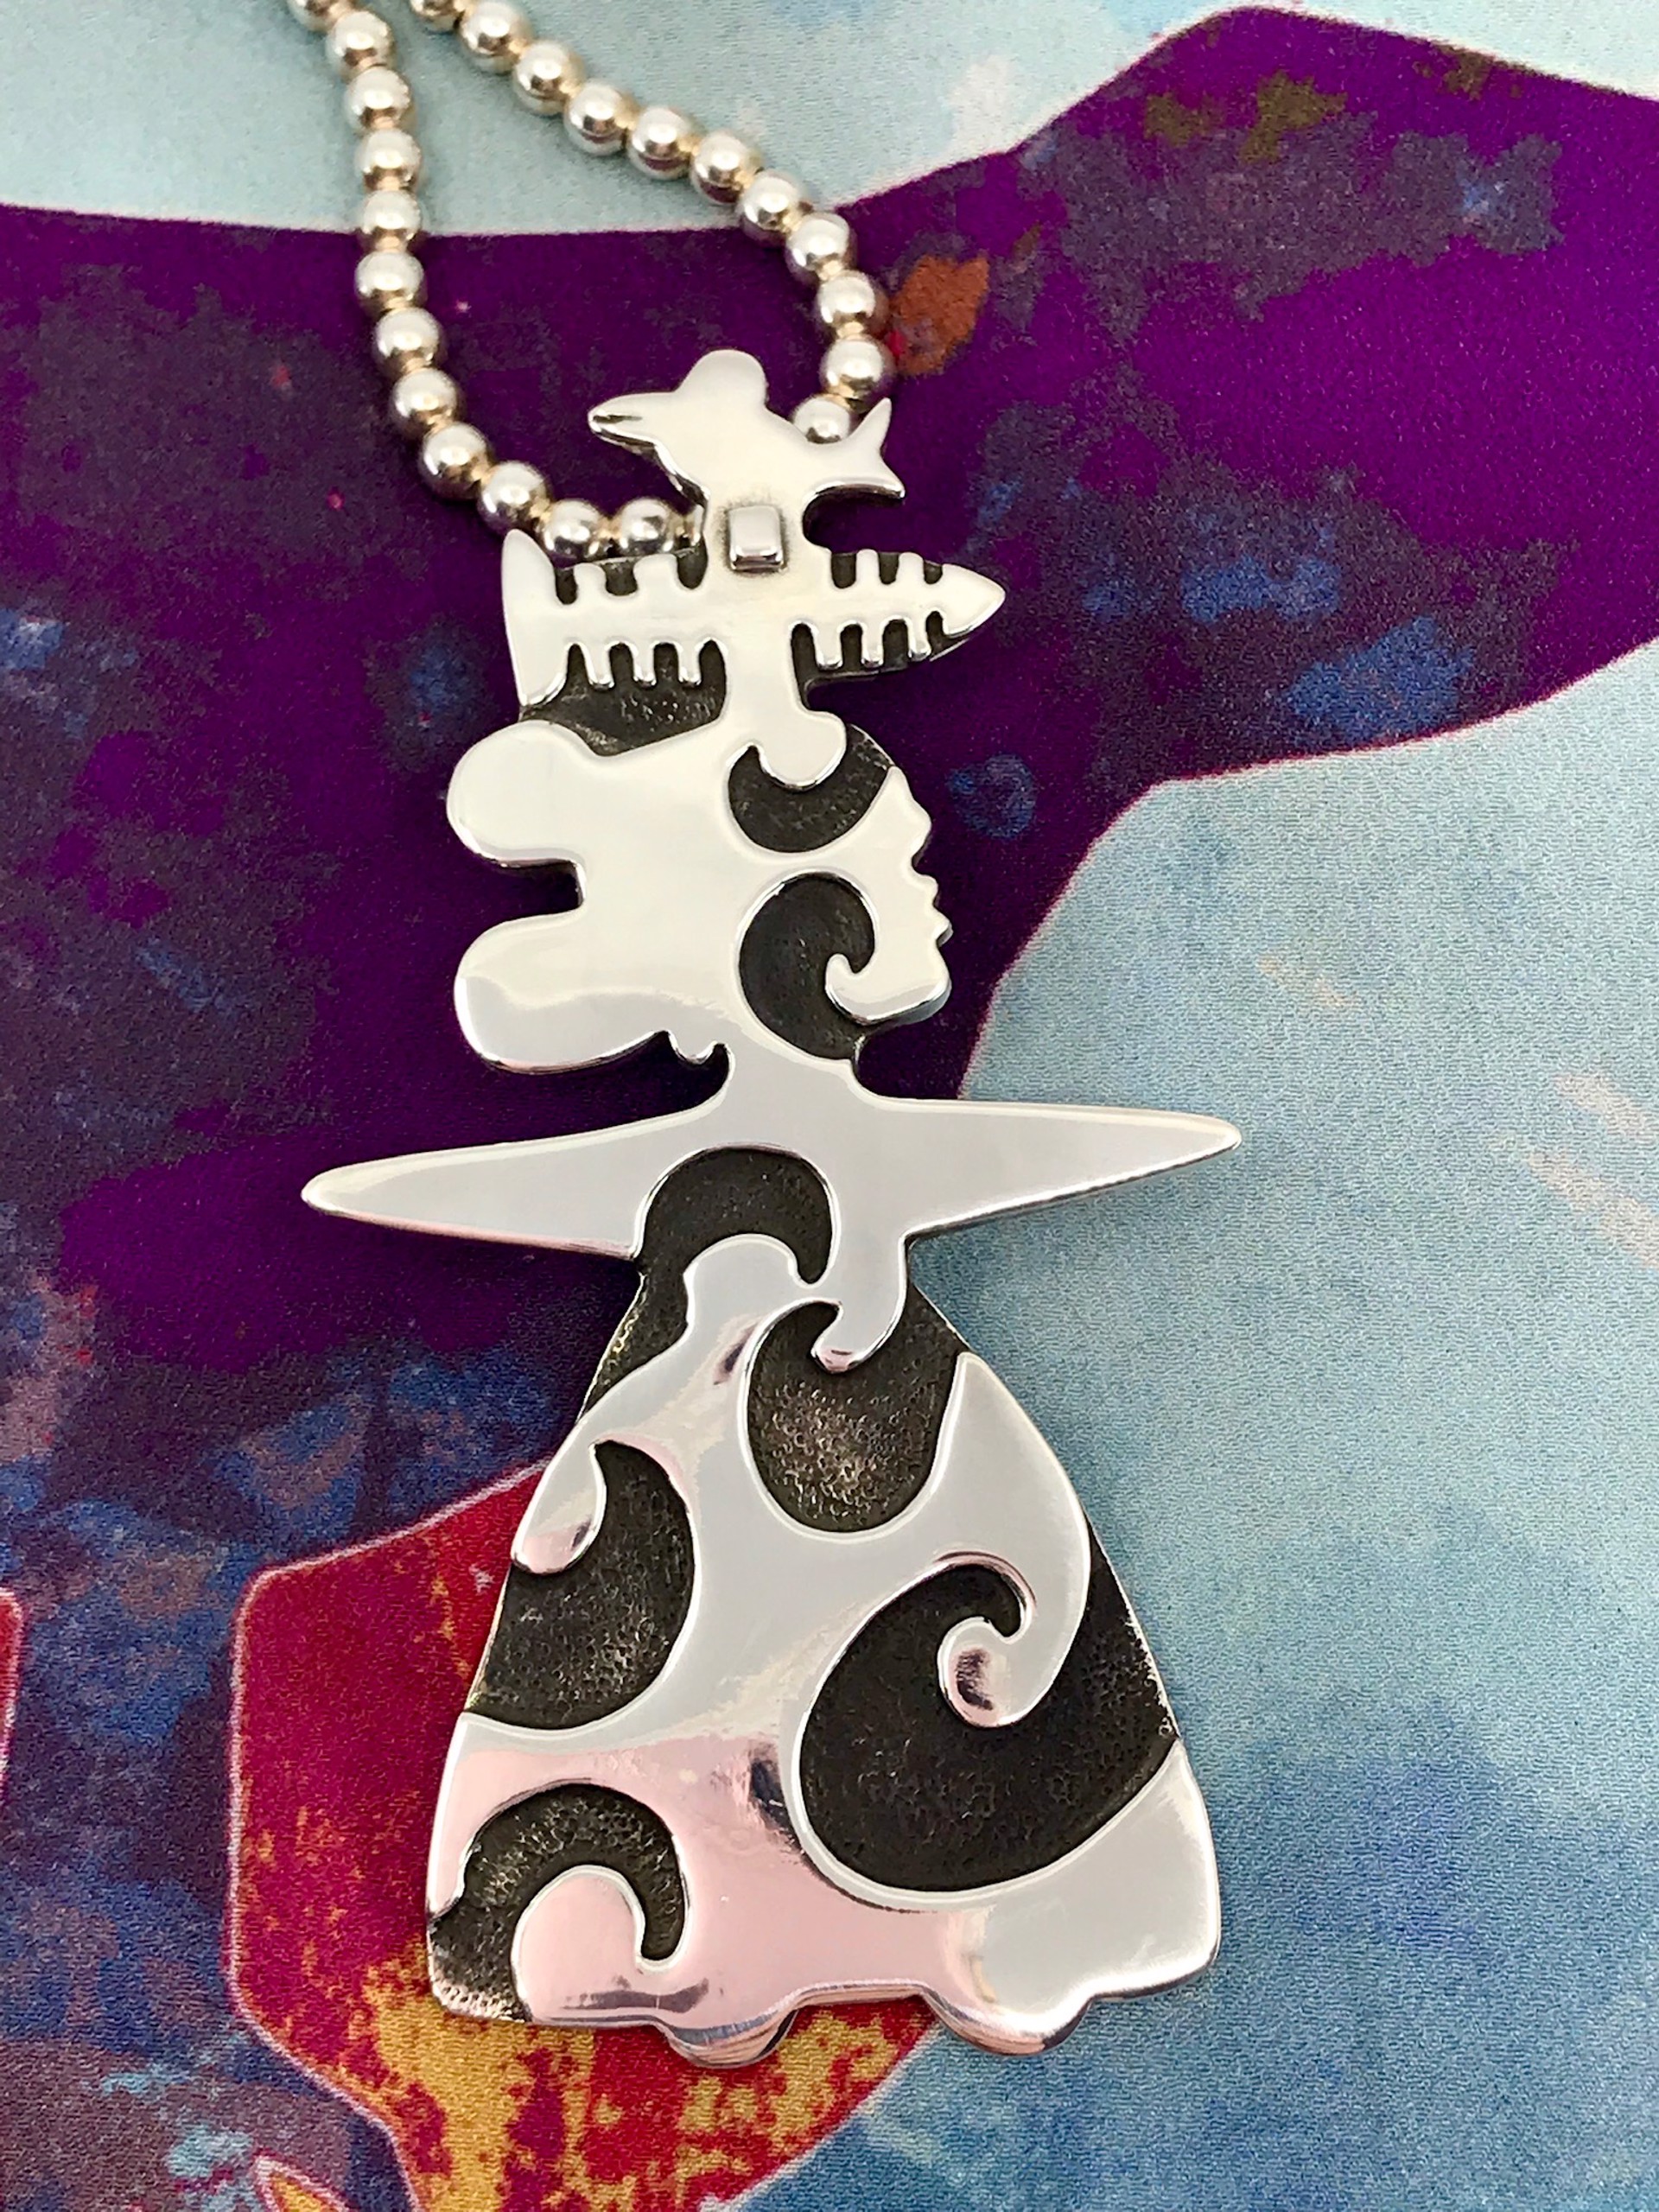 She's Singing (Pendant) by Melanie A. Yazzie